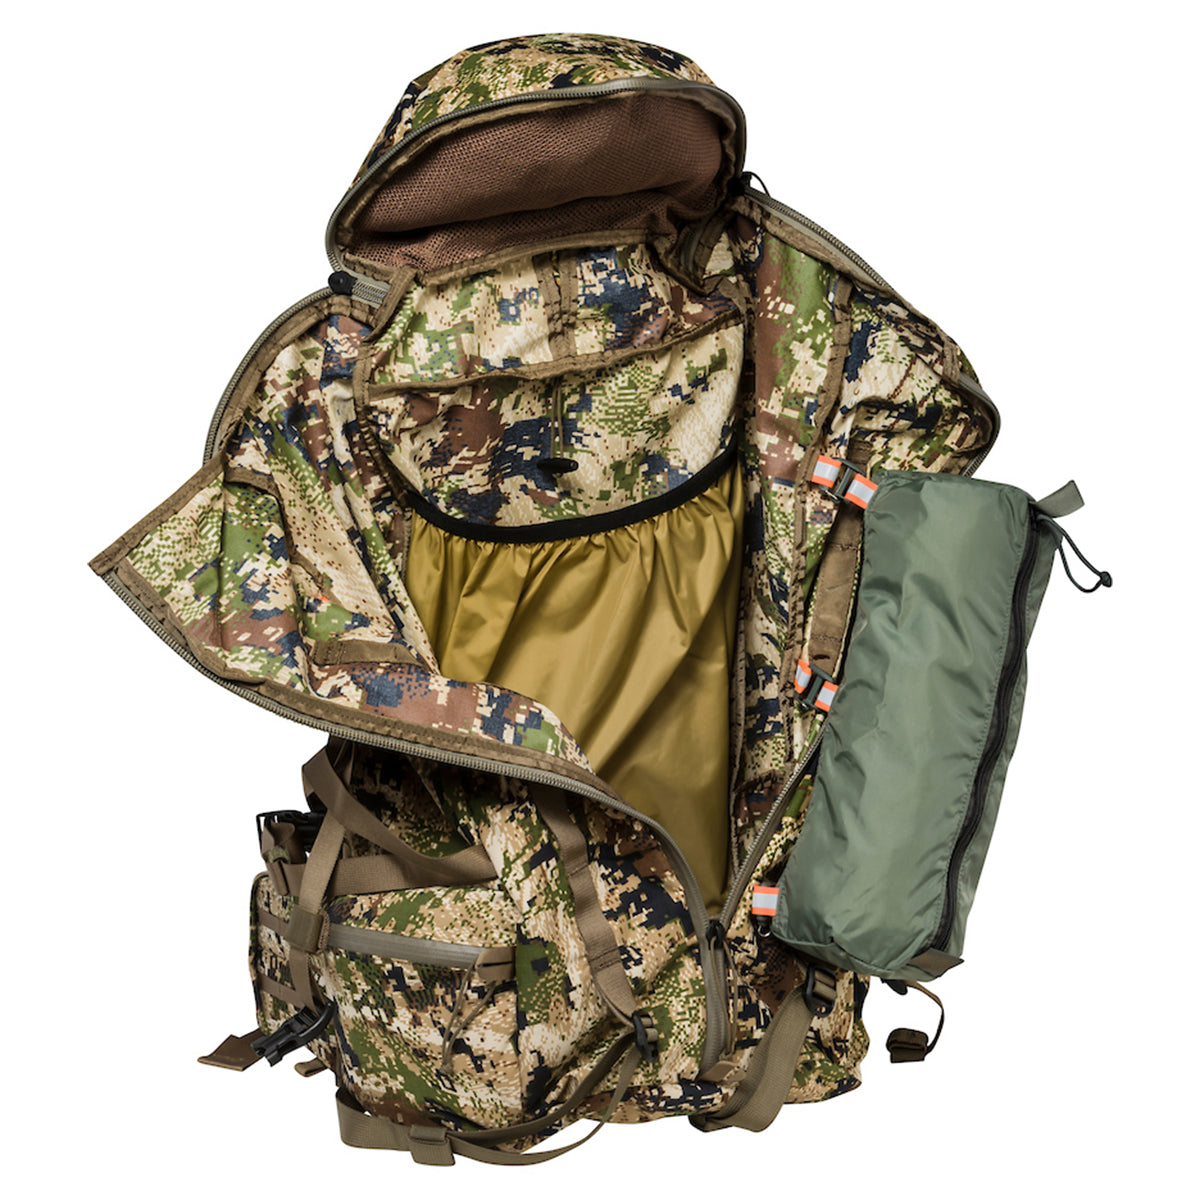 Mystery Ranch Quick Attach Zoid Bag in Mystery Ranch Quick Attach Zoid Bag by Mystery Ranch | Gear - goHUNT Shop by GOHUNT | Mystery Ranch - GOHUNT Shop